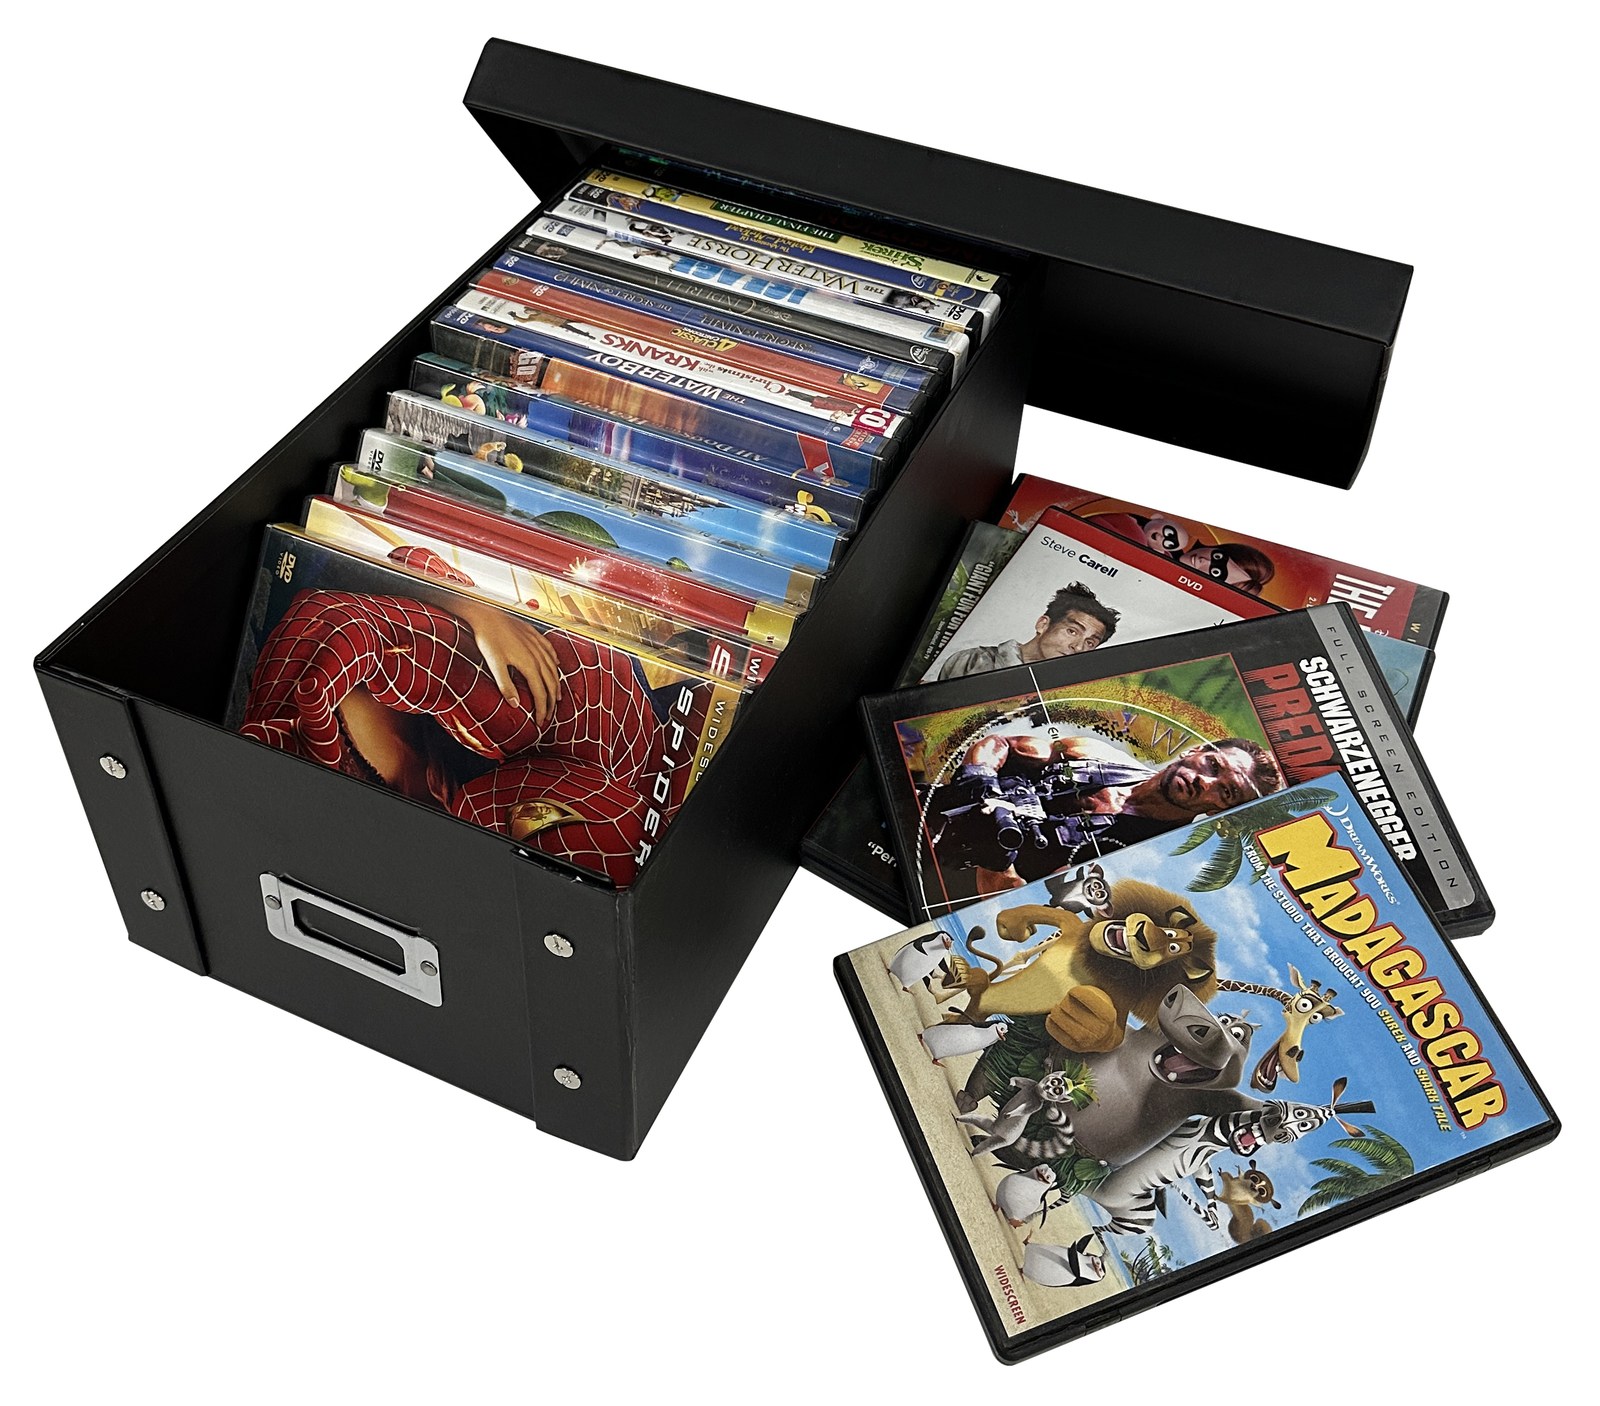 Primary image for CheckOutStore Black DVD Cases Storage Box (Holds 25 Cases)